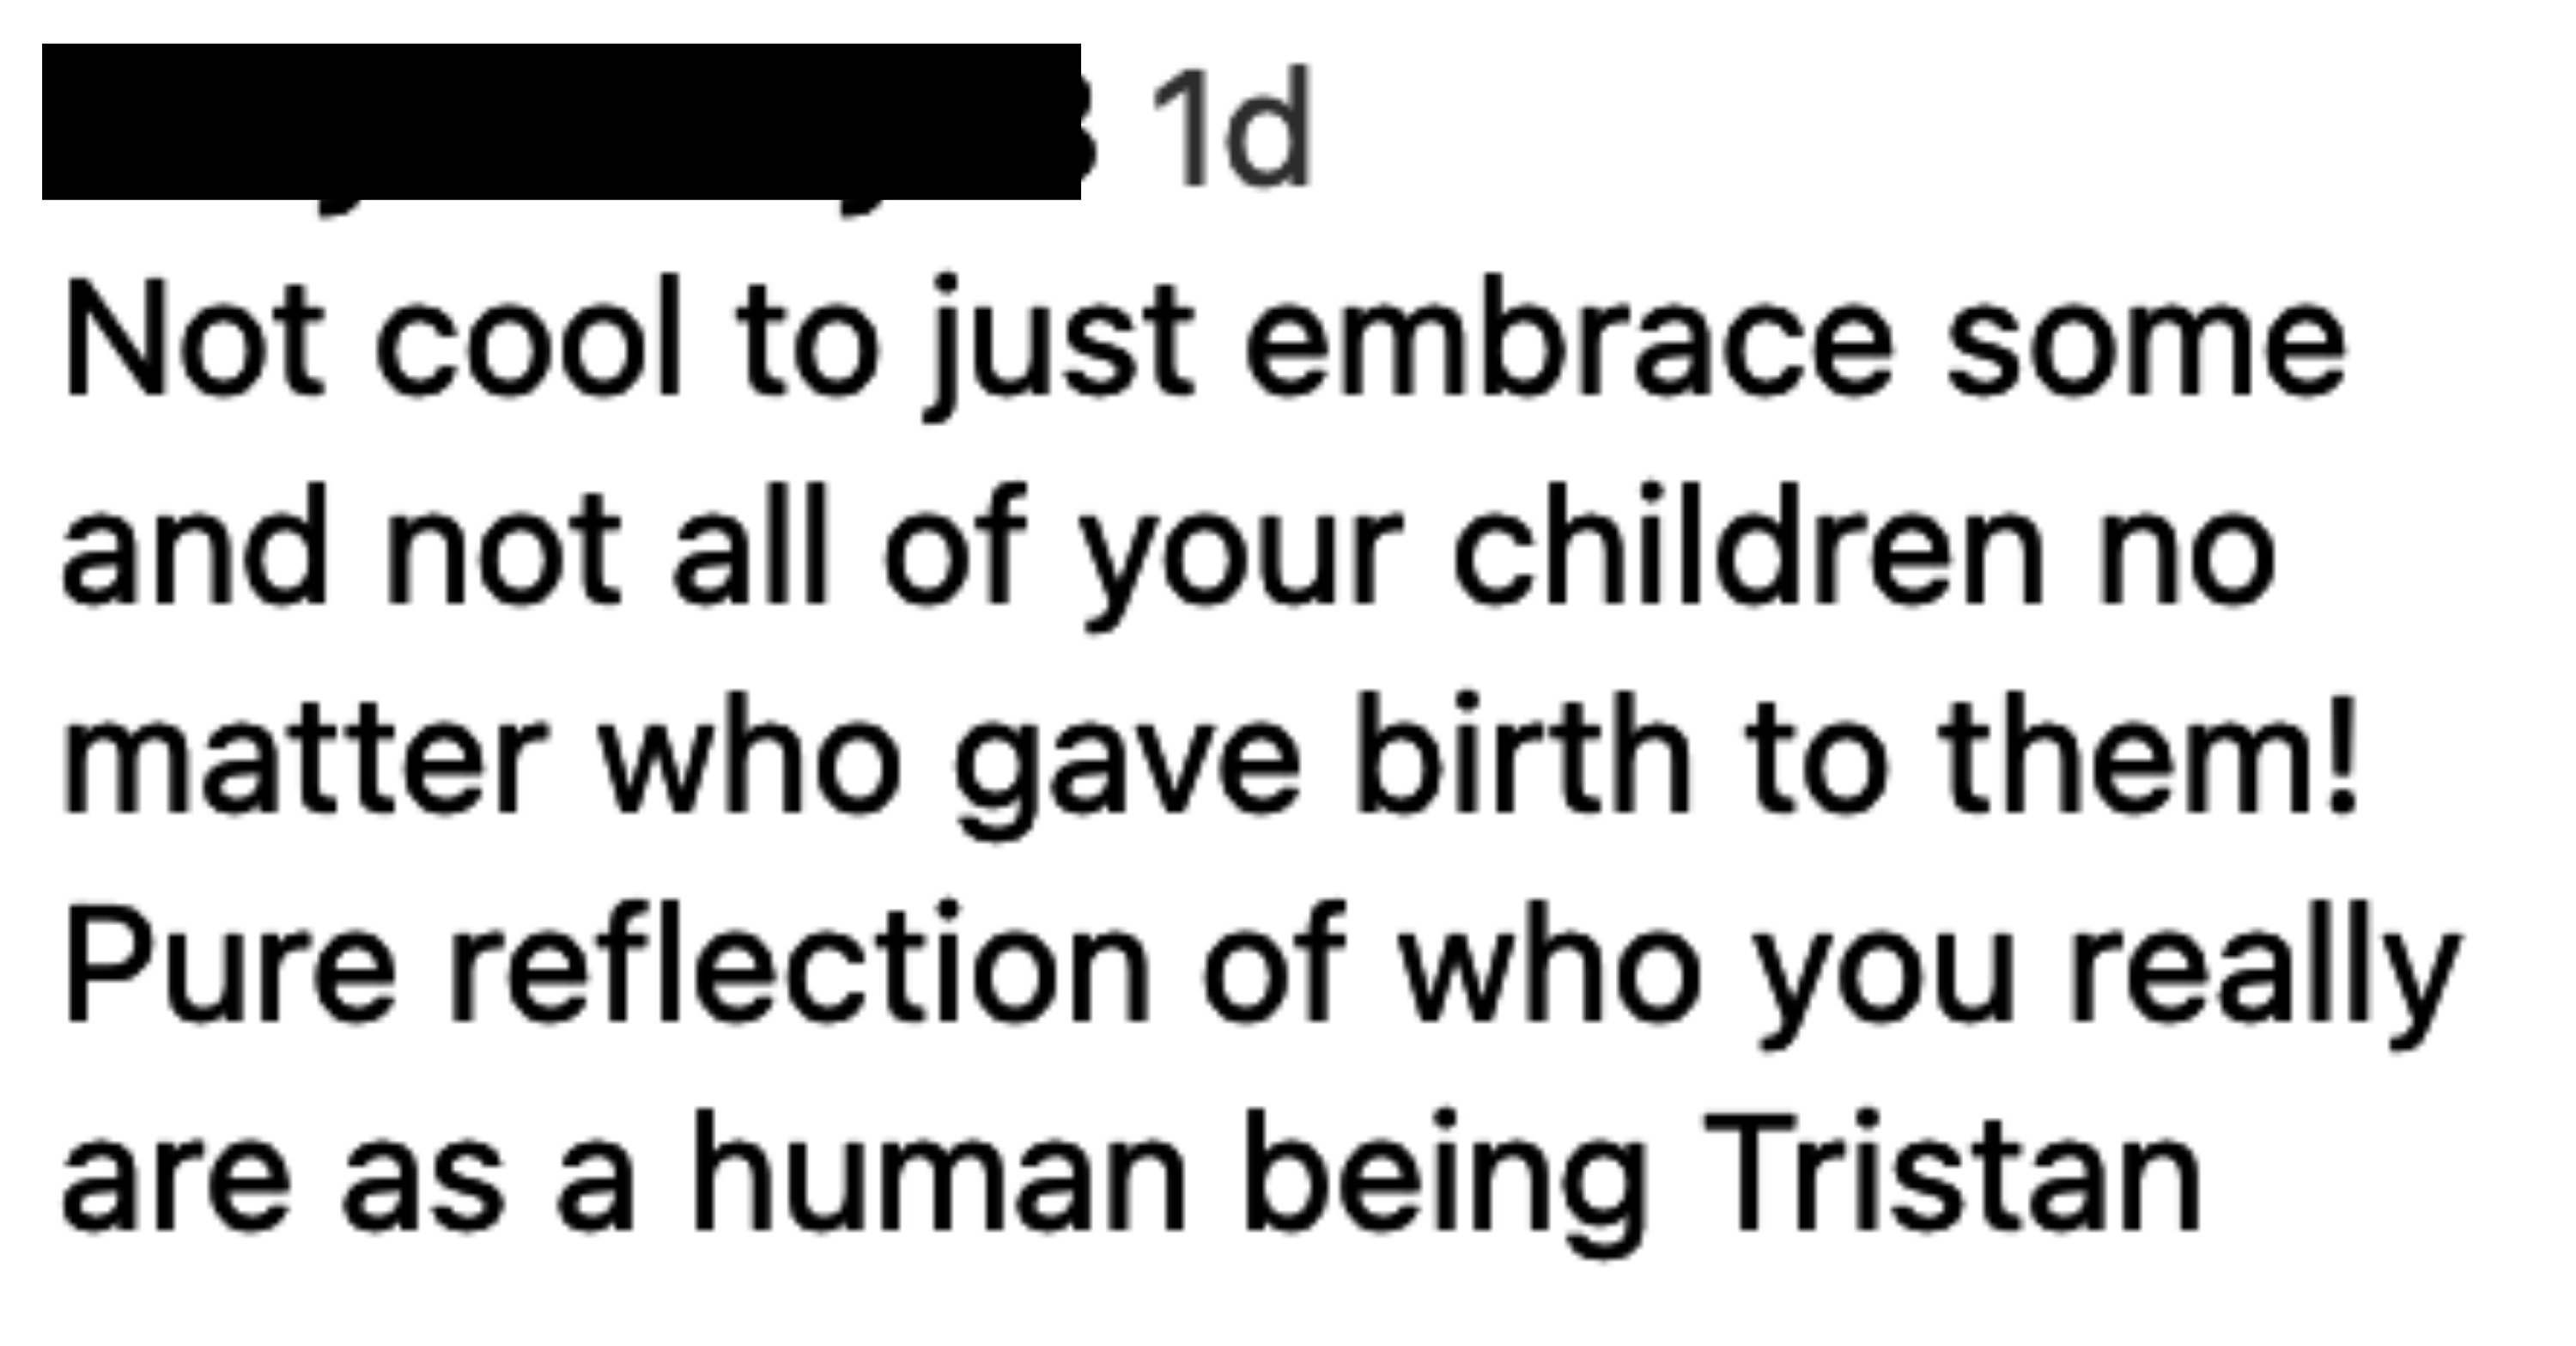 &quot;Pure reflection of who you really are as a human being Tristan&quot;